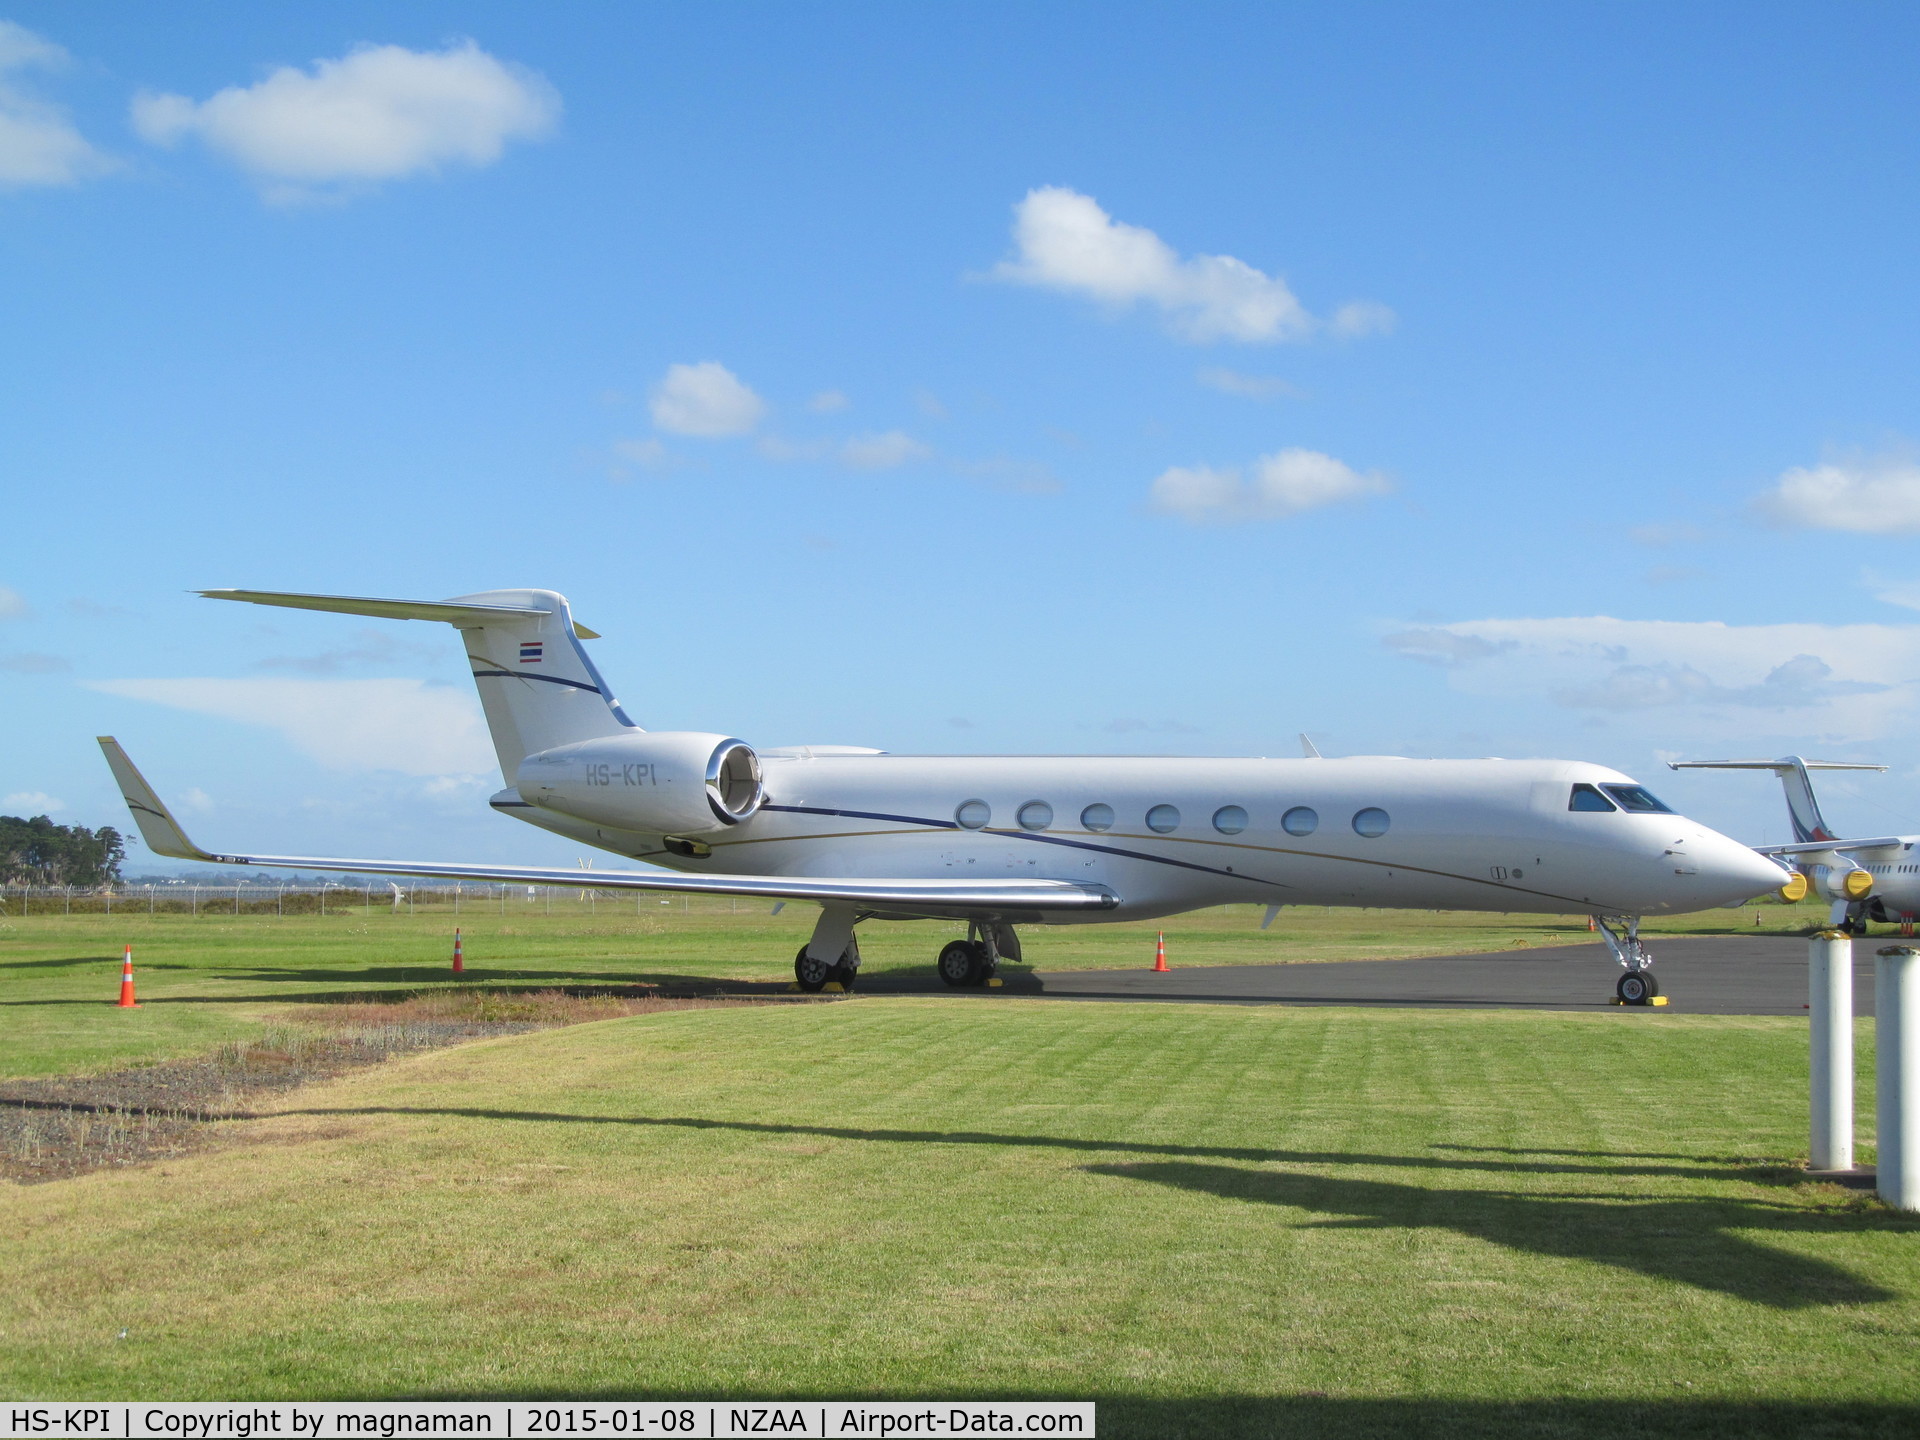 HS-KPI, 2014 Gulfstream Aerospace V-SP G550 C/N 5480, moved to short term parking stand